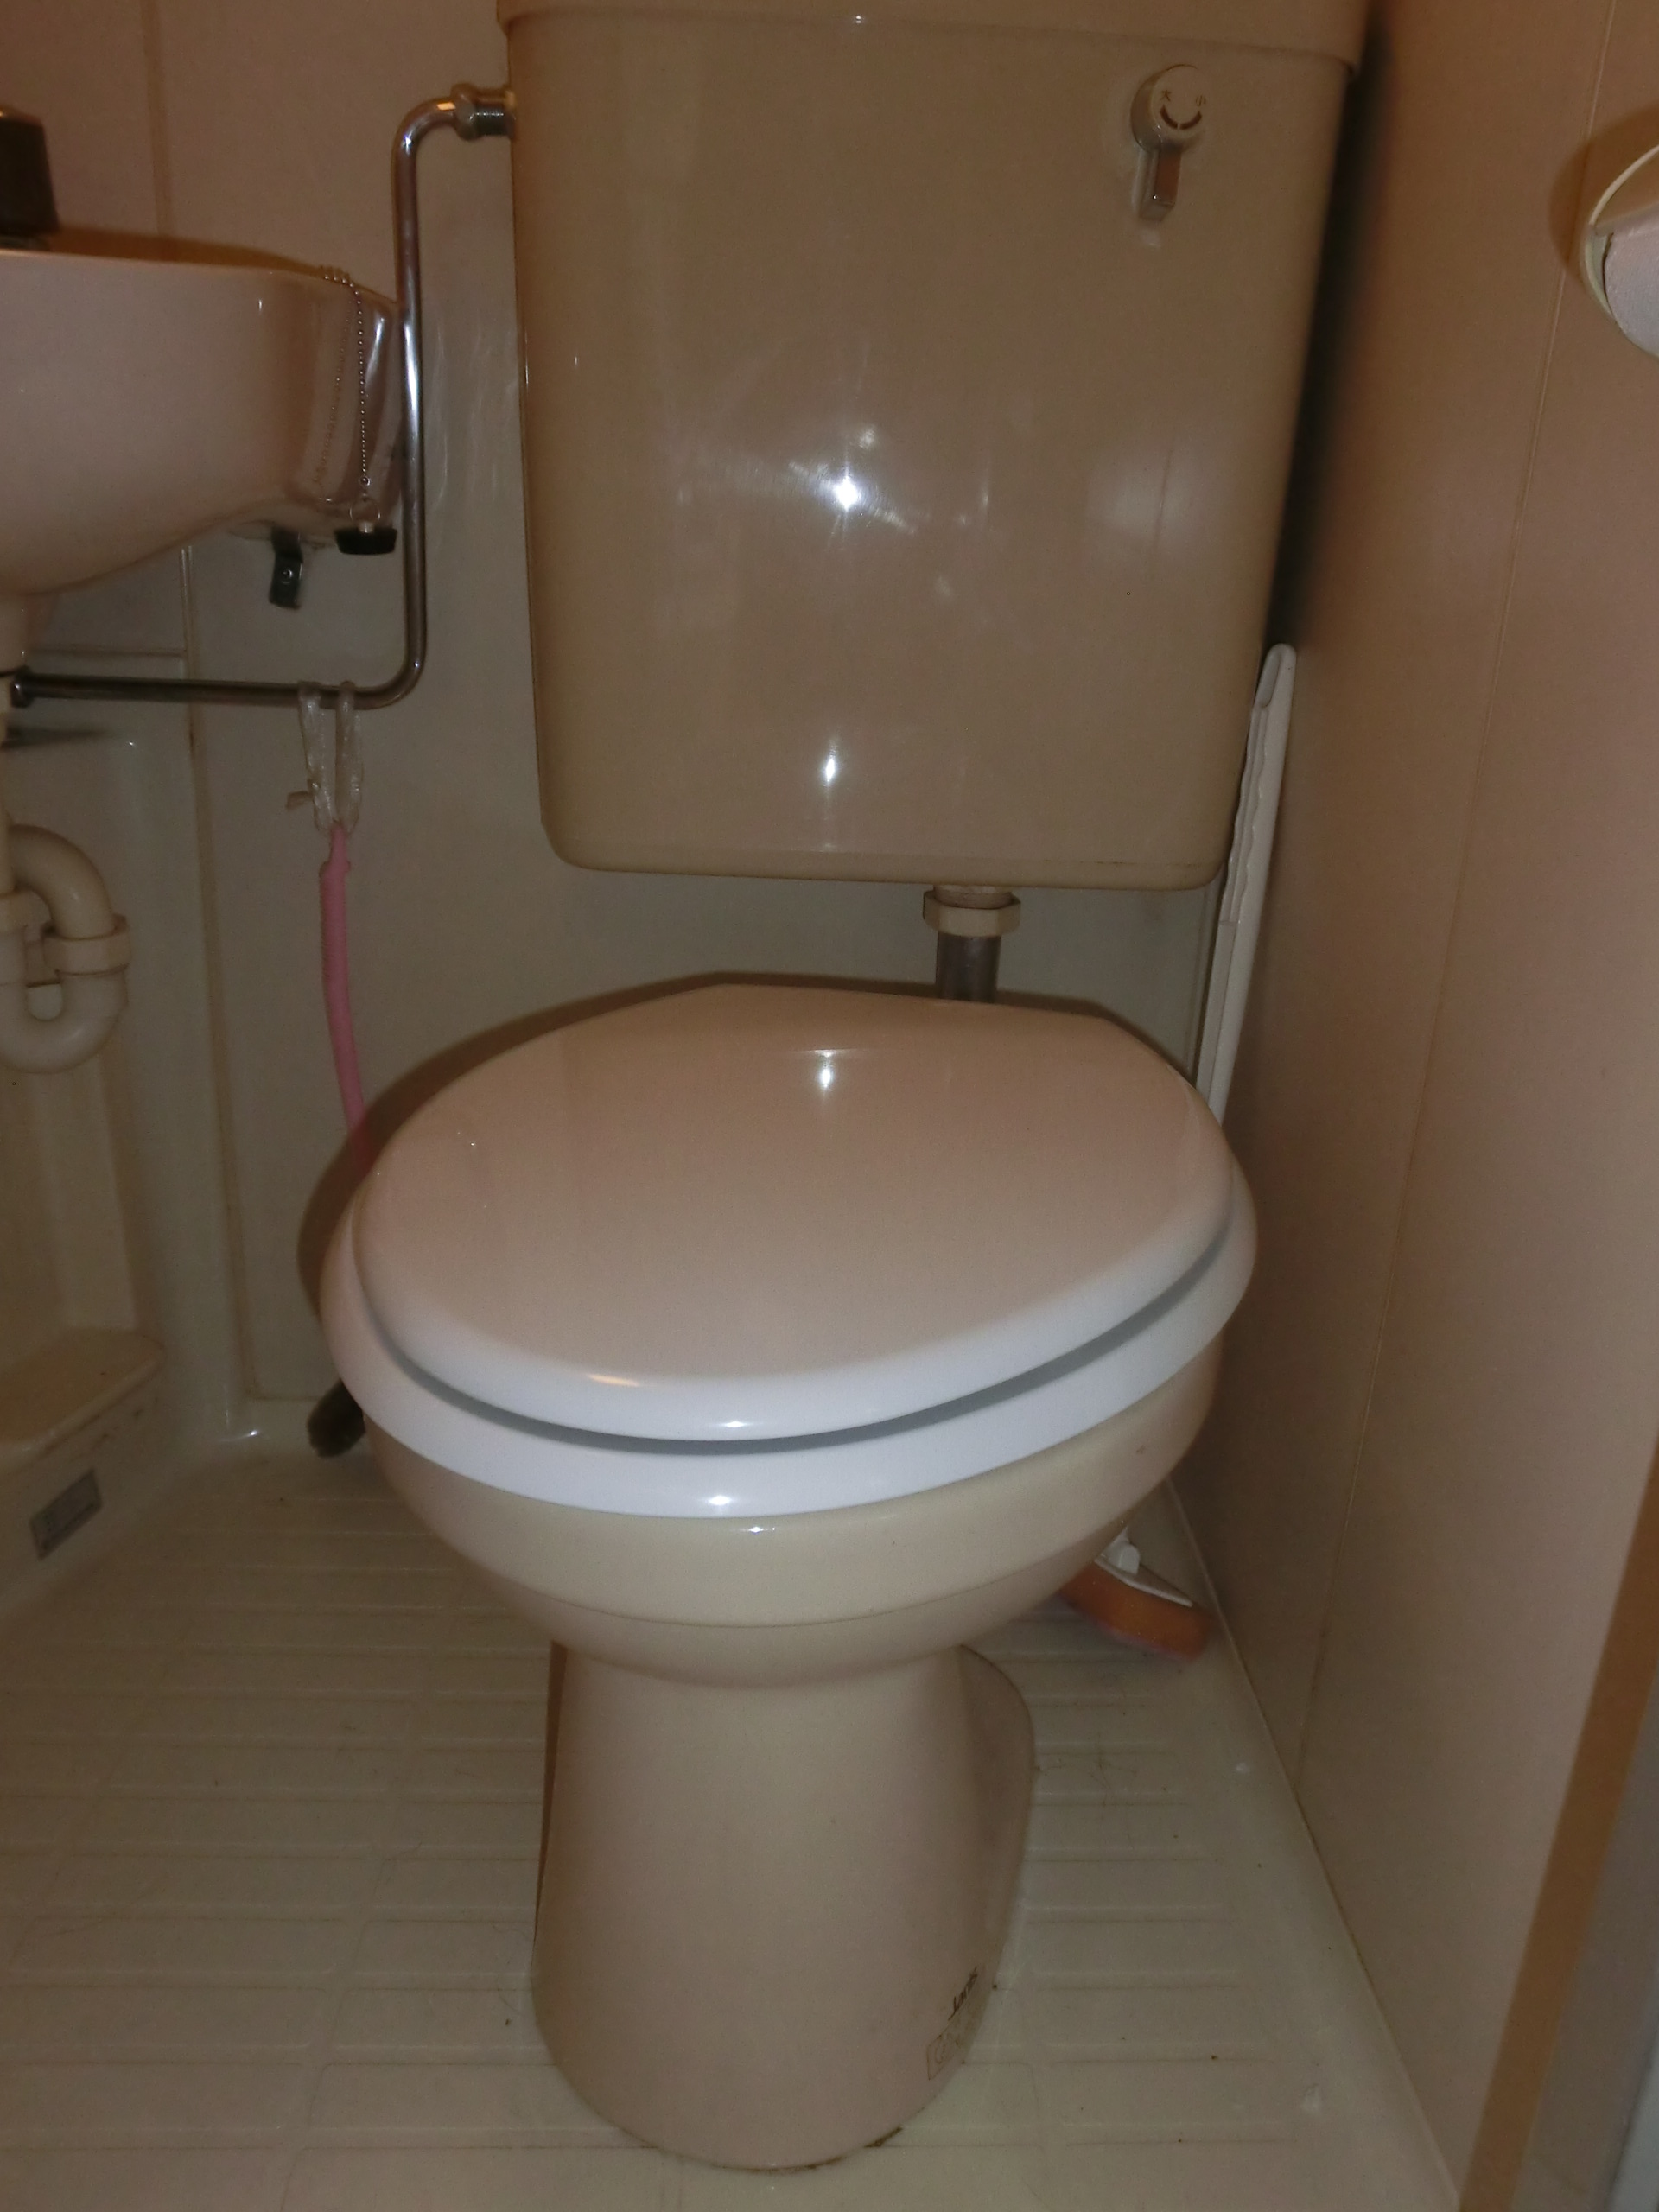 Toilet. It has been replaced lid